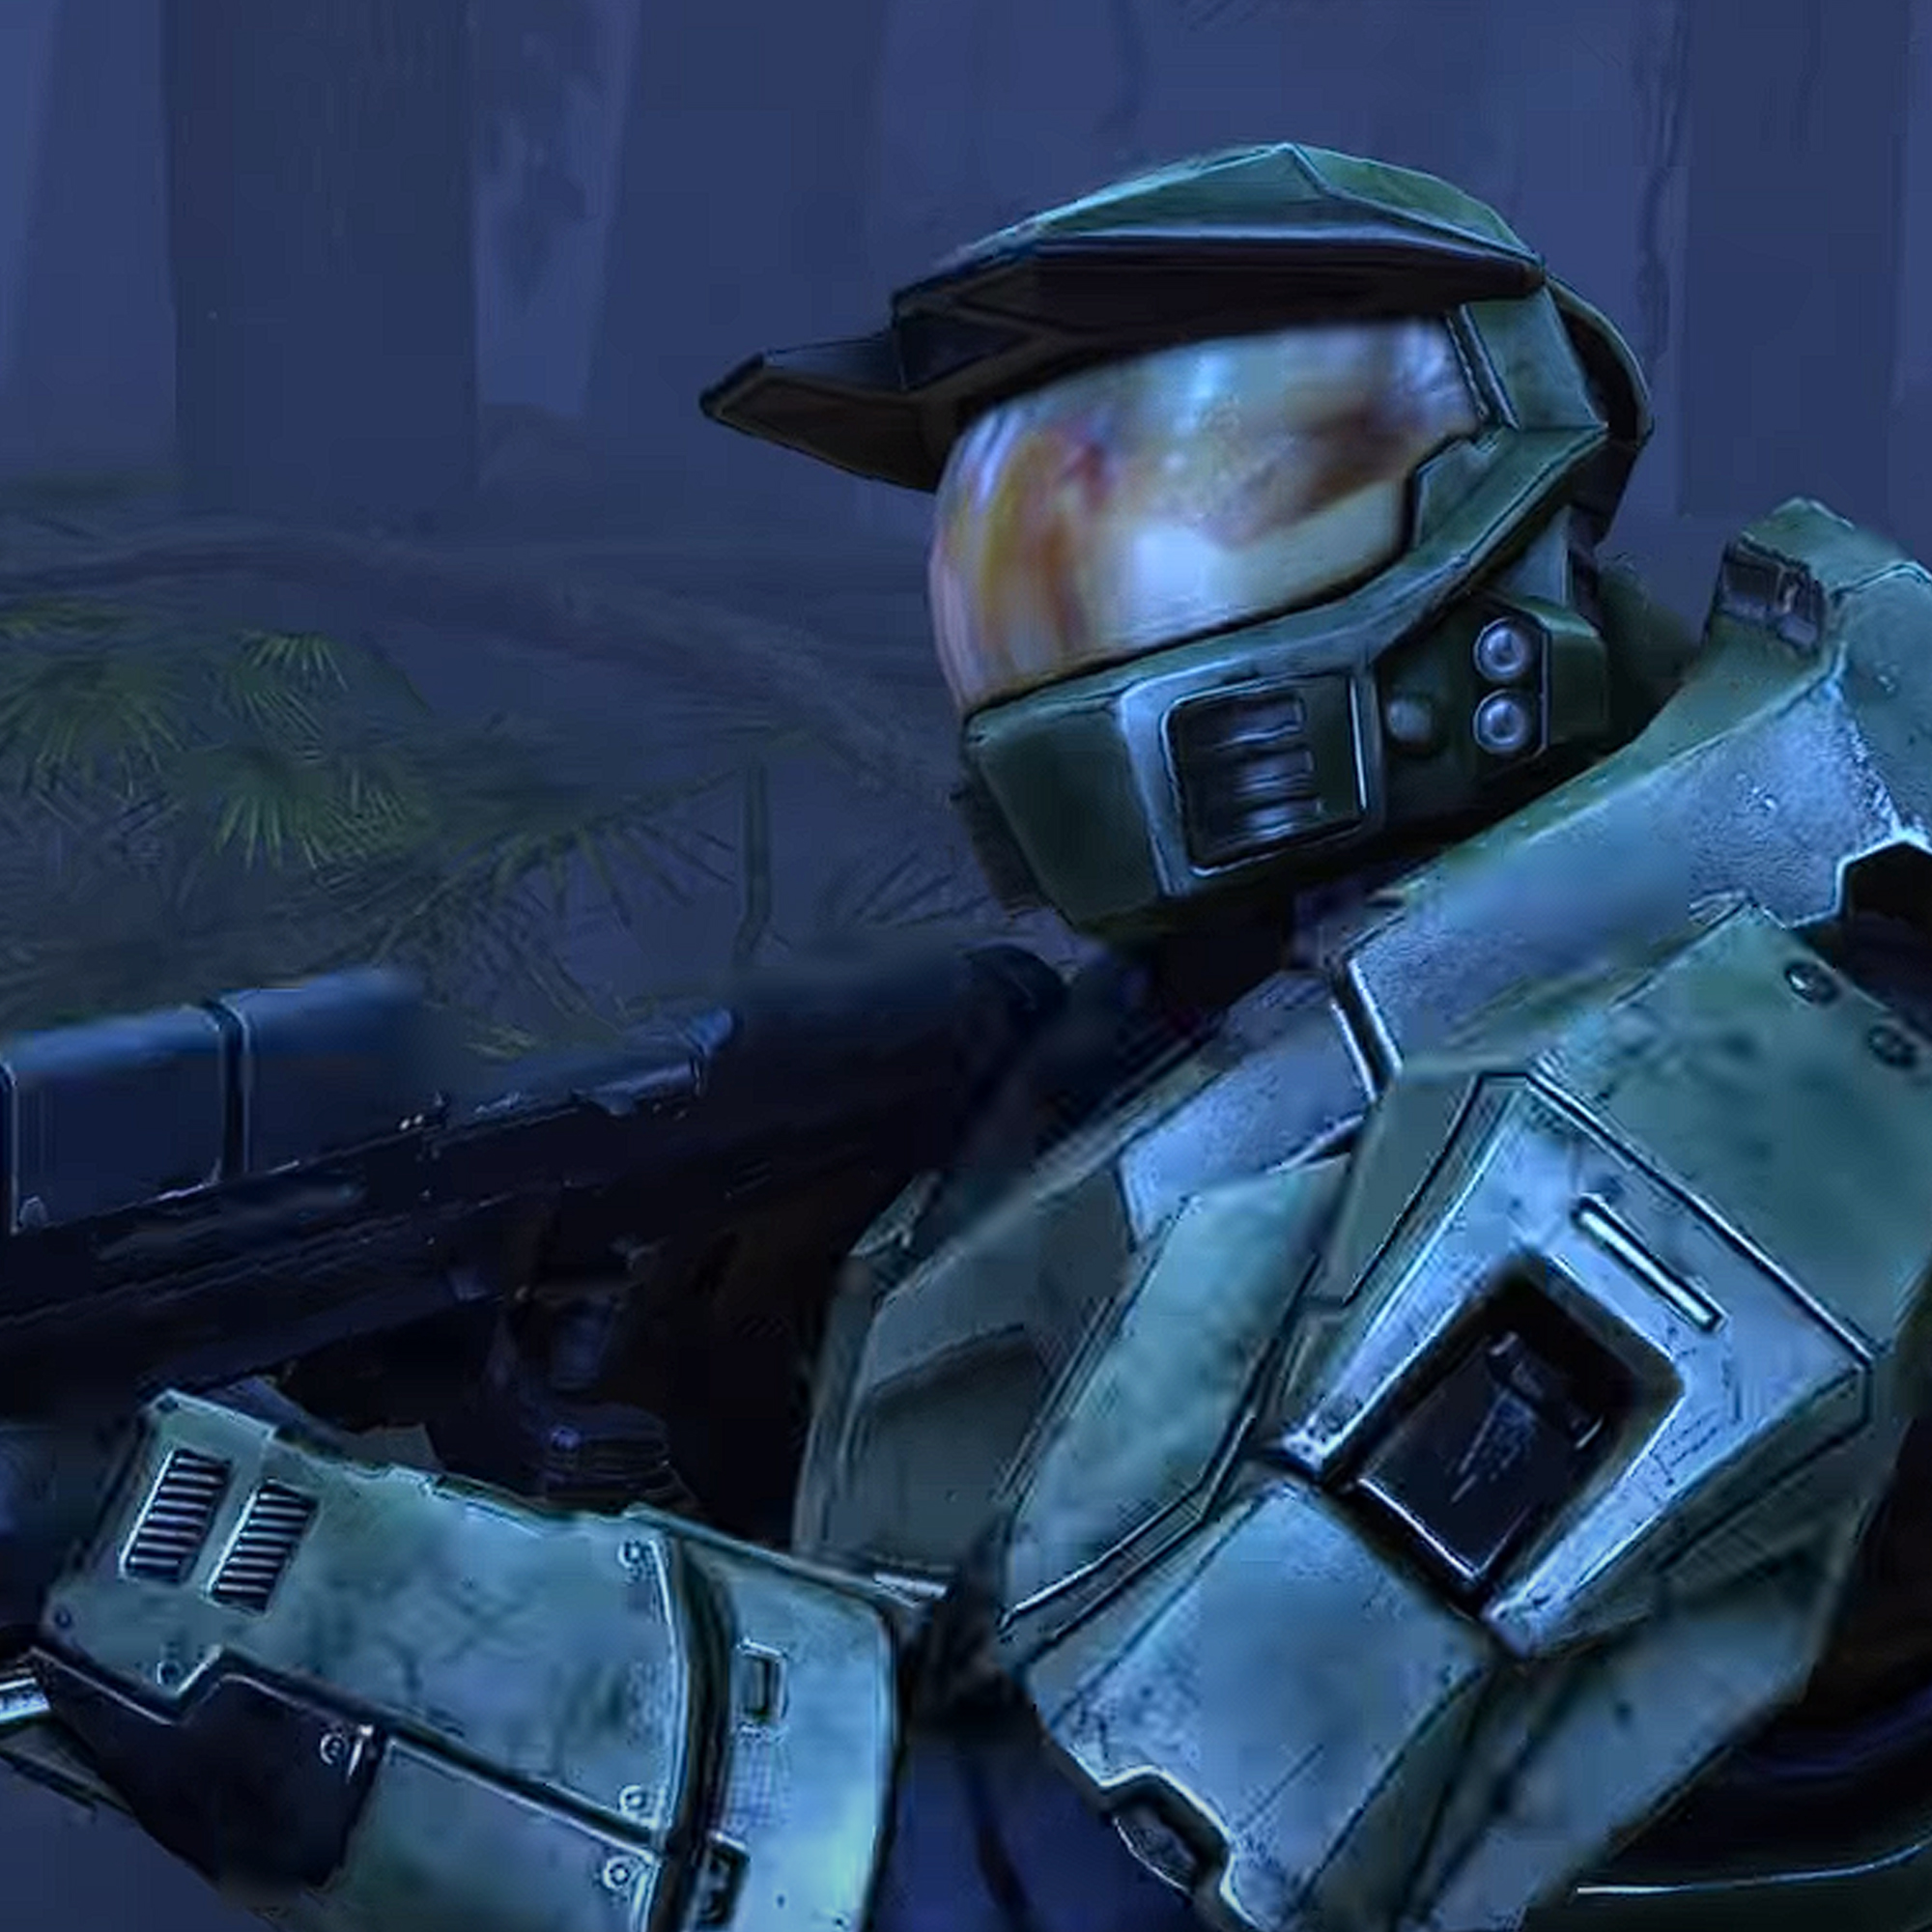 Master Chief from "Halo" | Source: youtube.com/Halo